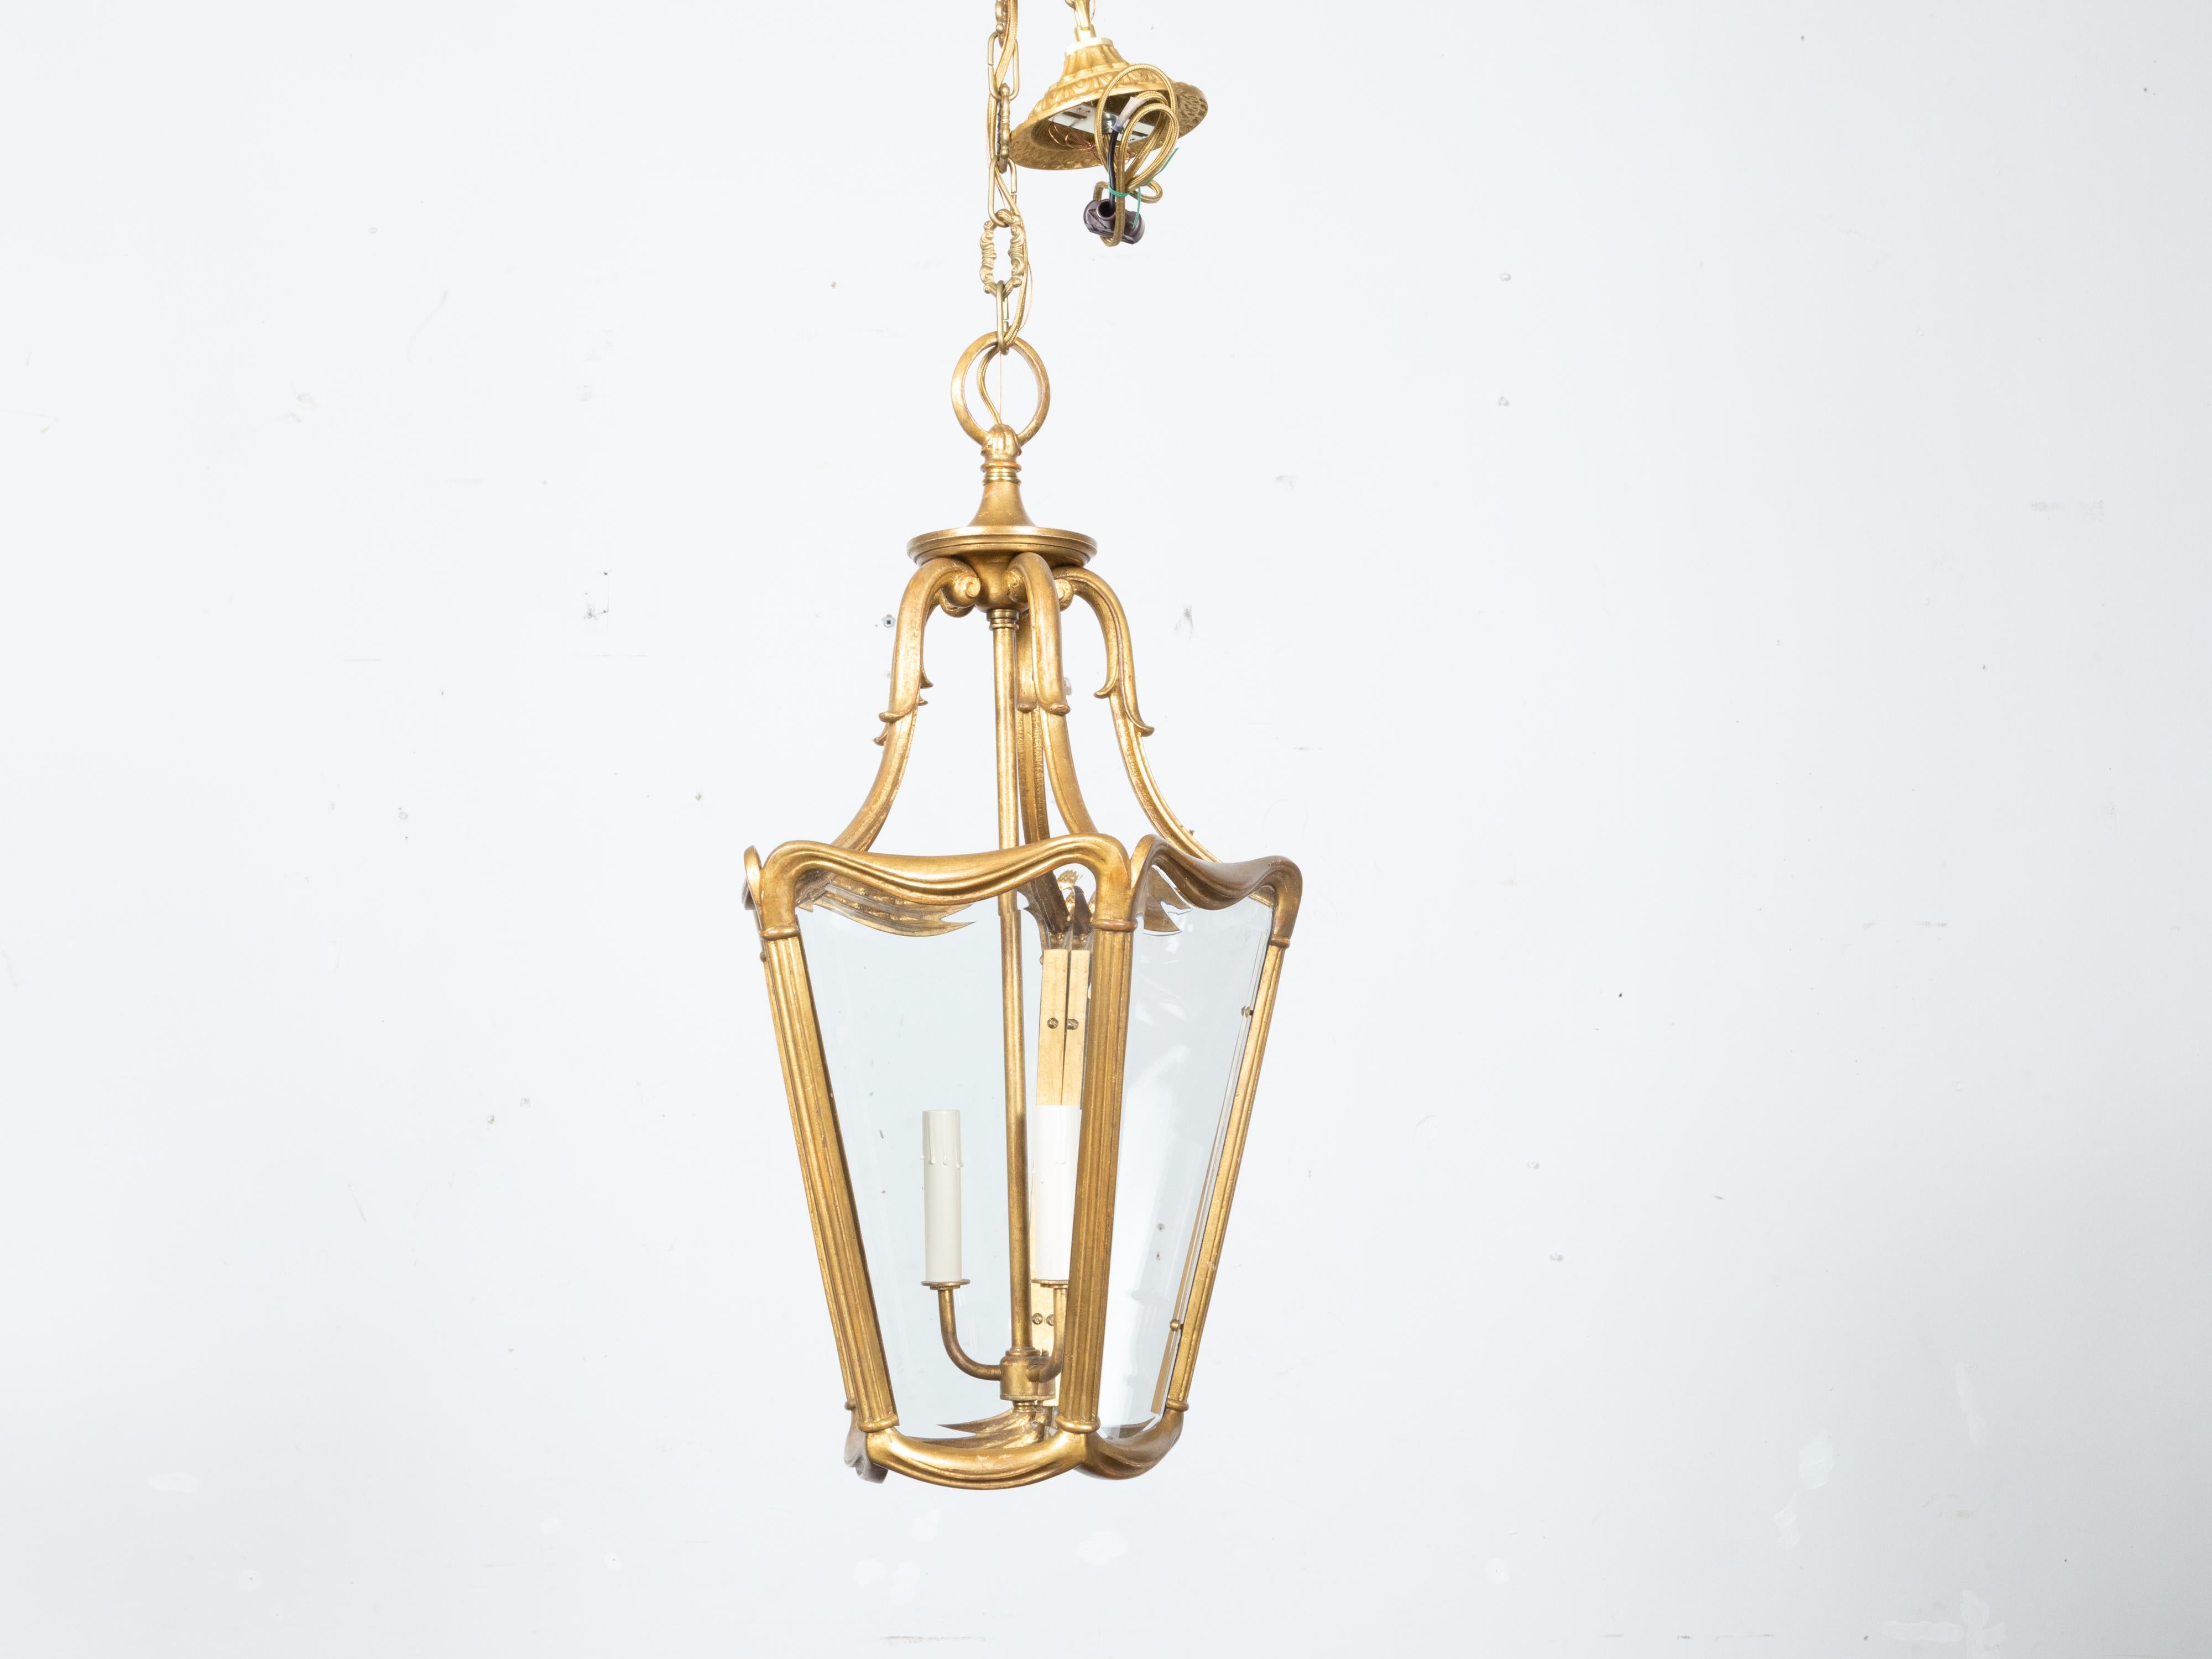 A Midcentury Continental Art Nouveau style gilt metal lantern with three lights. Immerse your space in the classic elegance of the Art Nouveau era with this Continental Midcentury gilt metal lantern. A testament to skilled craftsmanship and refined